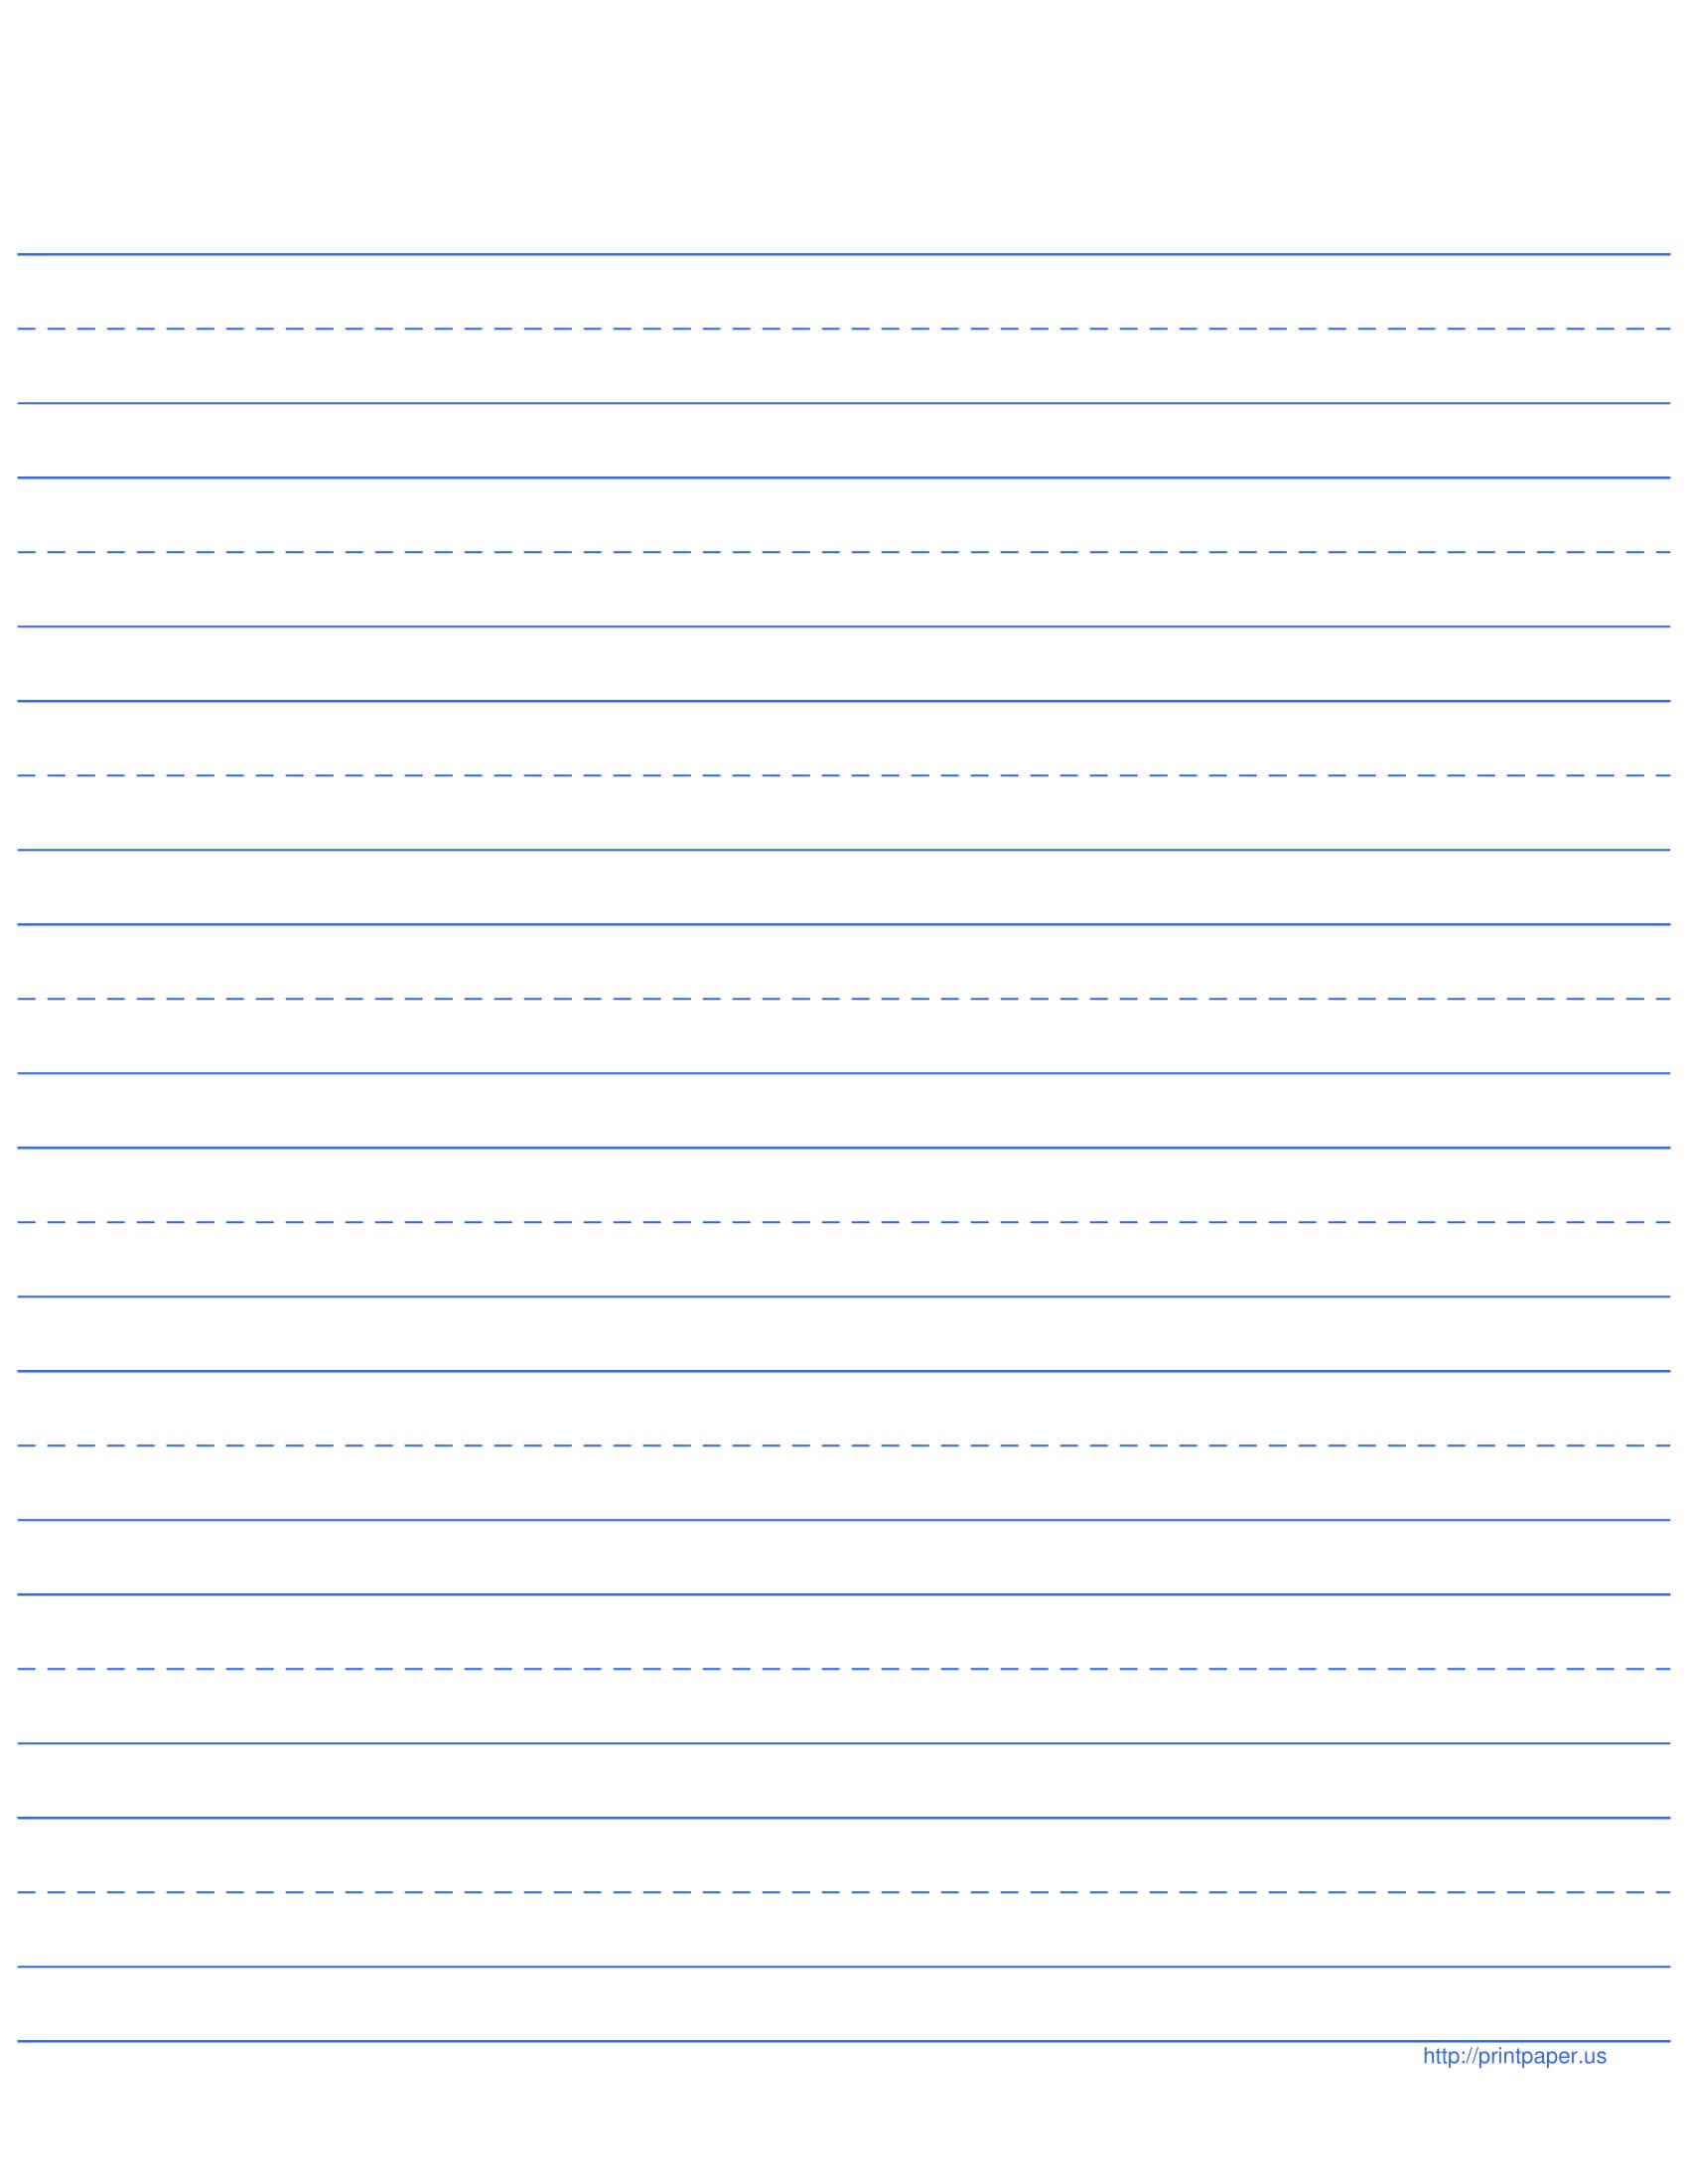 11+ Lined Paper Templates – Pdf | Free & Premium Templates Within Ruled Paper Word Template